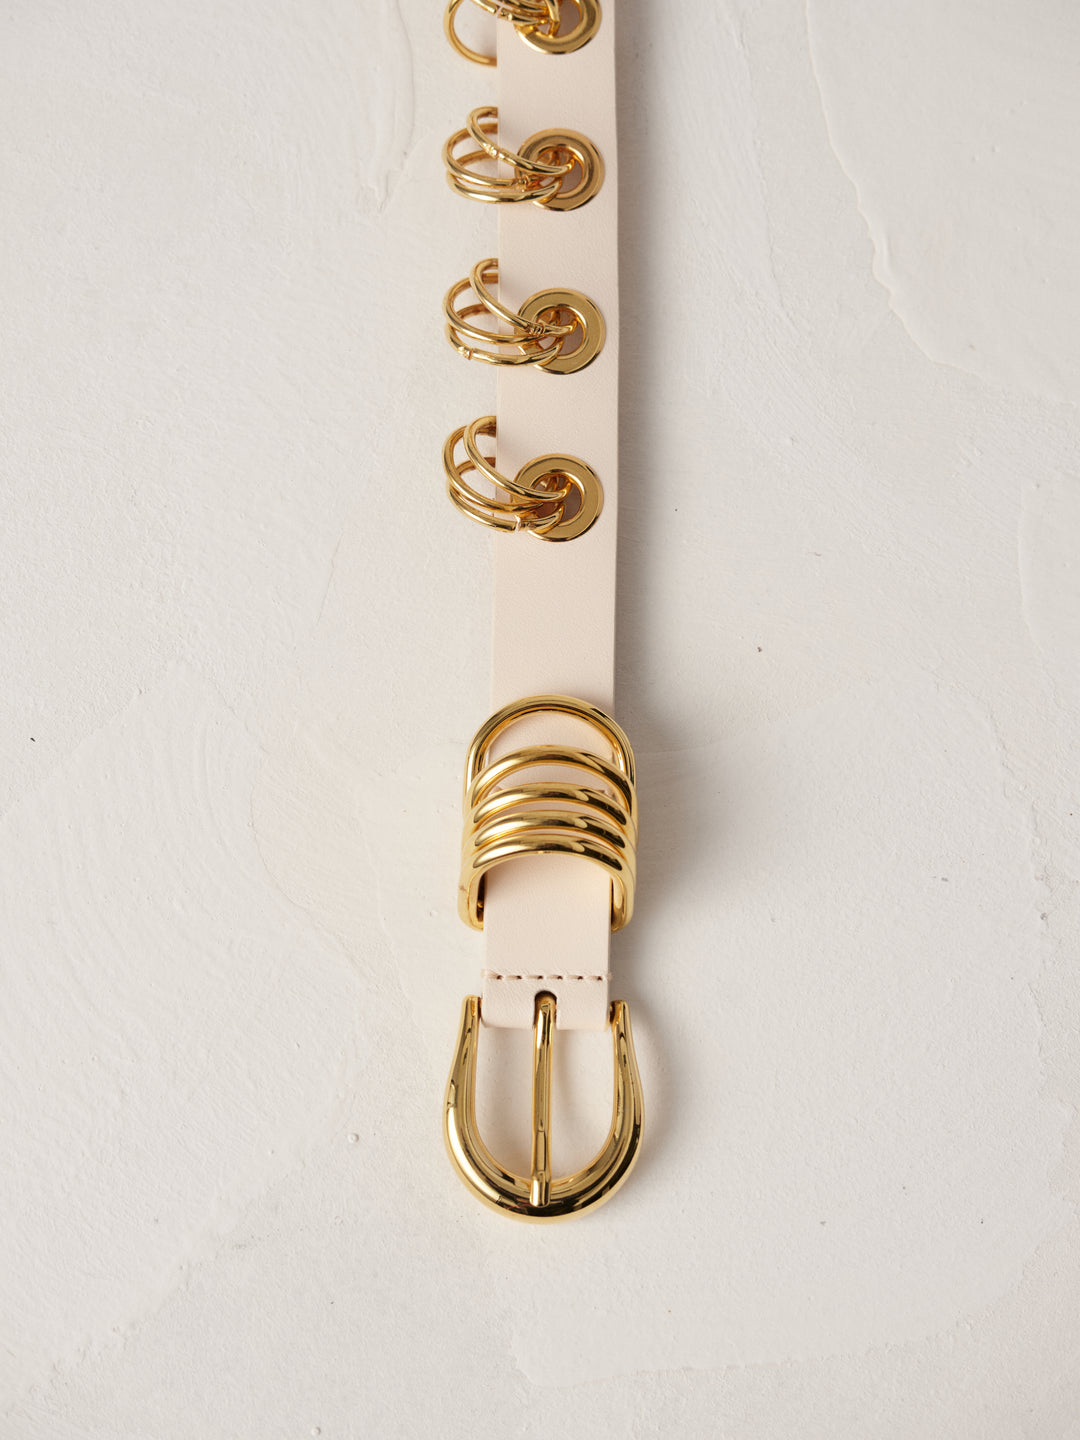 Déhanche Revenge Gold white leather belt with gold grommets and buckle, displayed against a light background.